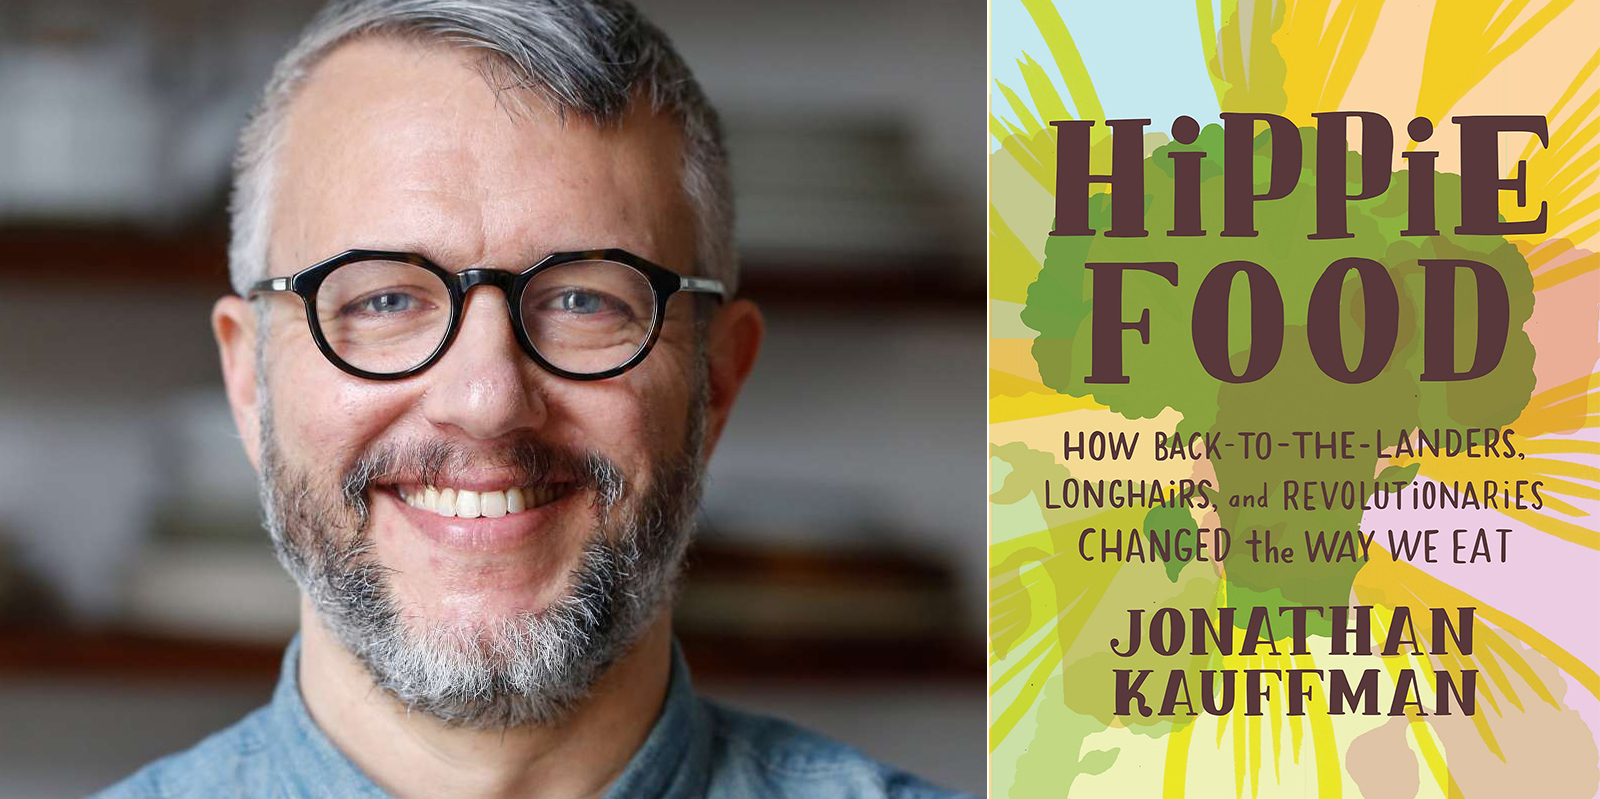 Hippie Food- How Back-to-the-Landers, Longhairs, and Revolutionaries Changed the Way We Eat, by Jonathan Kauffman